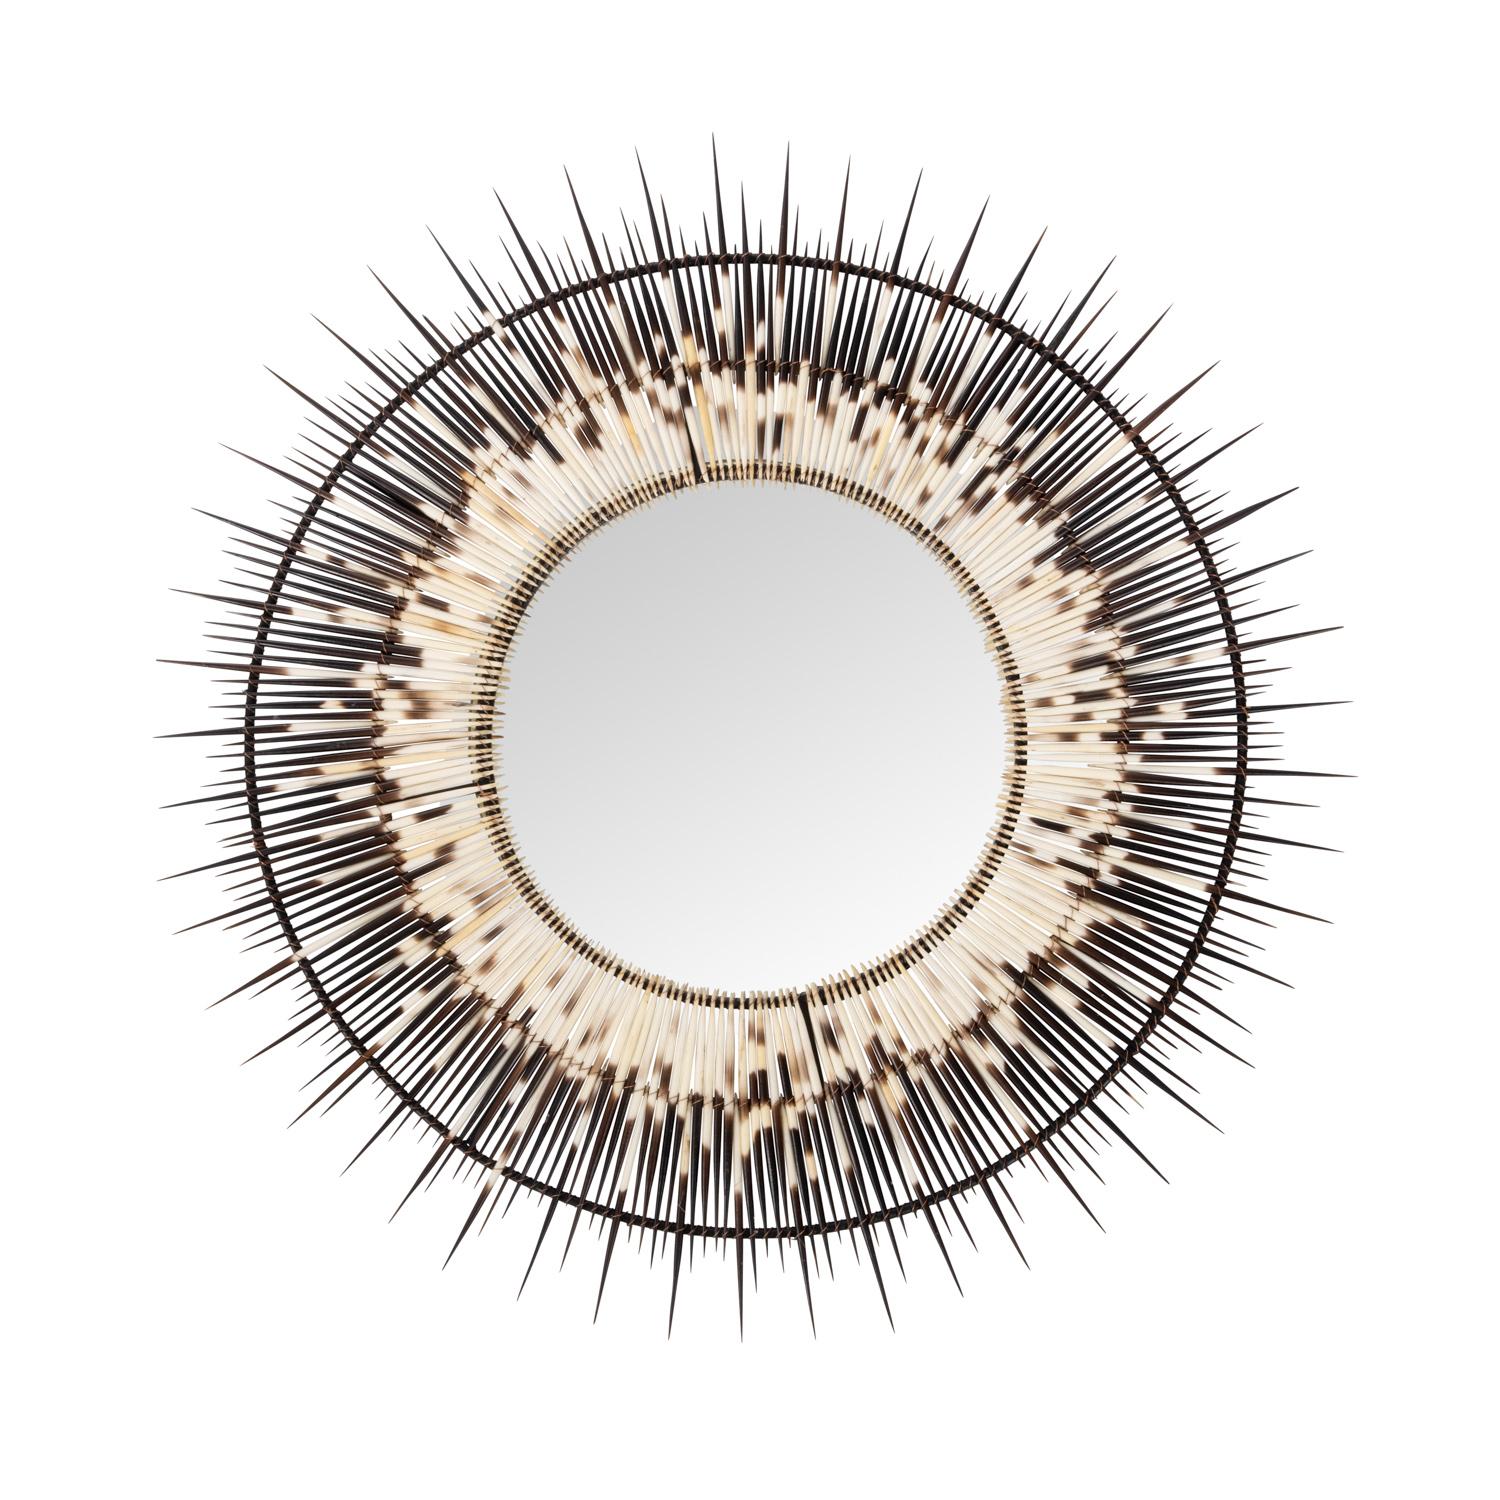 An earthy yet edgy take on the classic starburst mirror, this striking piece was handcrafted from genuine porcupine quills, naturally shed and collected on a farm in Cape Town, South Africa. Due to the use of natural materials, each piece is unique